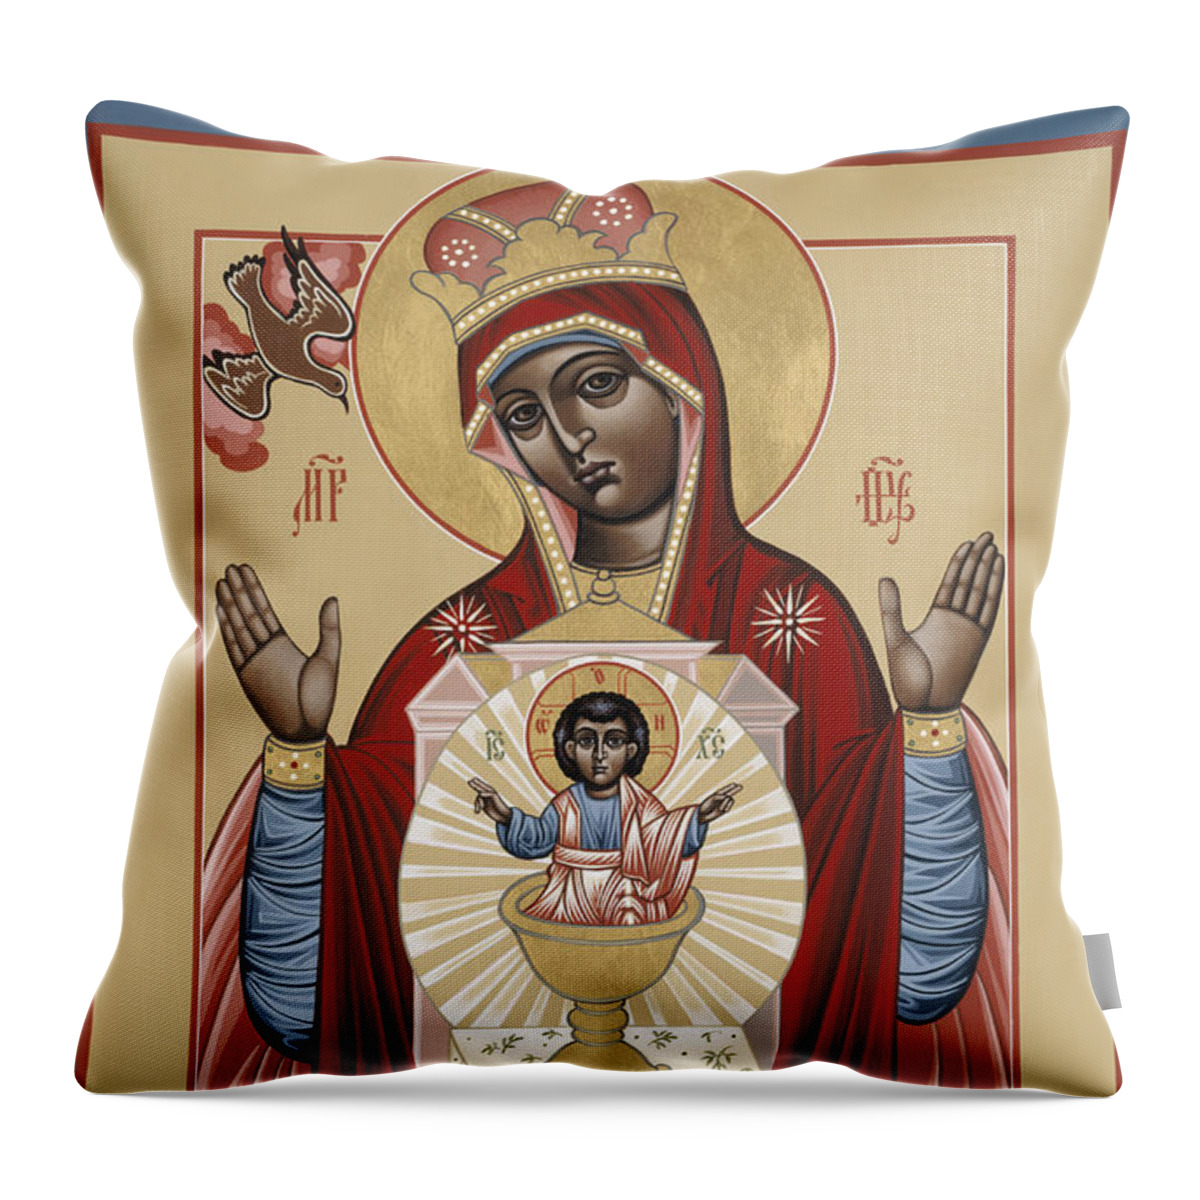 Your Lap Has Become The Holy Table (black Madonna) Throw Pillow featuring the painting The Black Madonna Your Lap Has Become the Holy Table 060 by William Hart McNichols